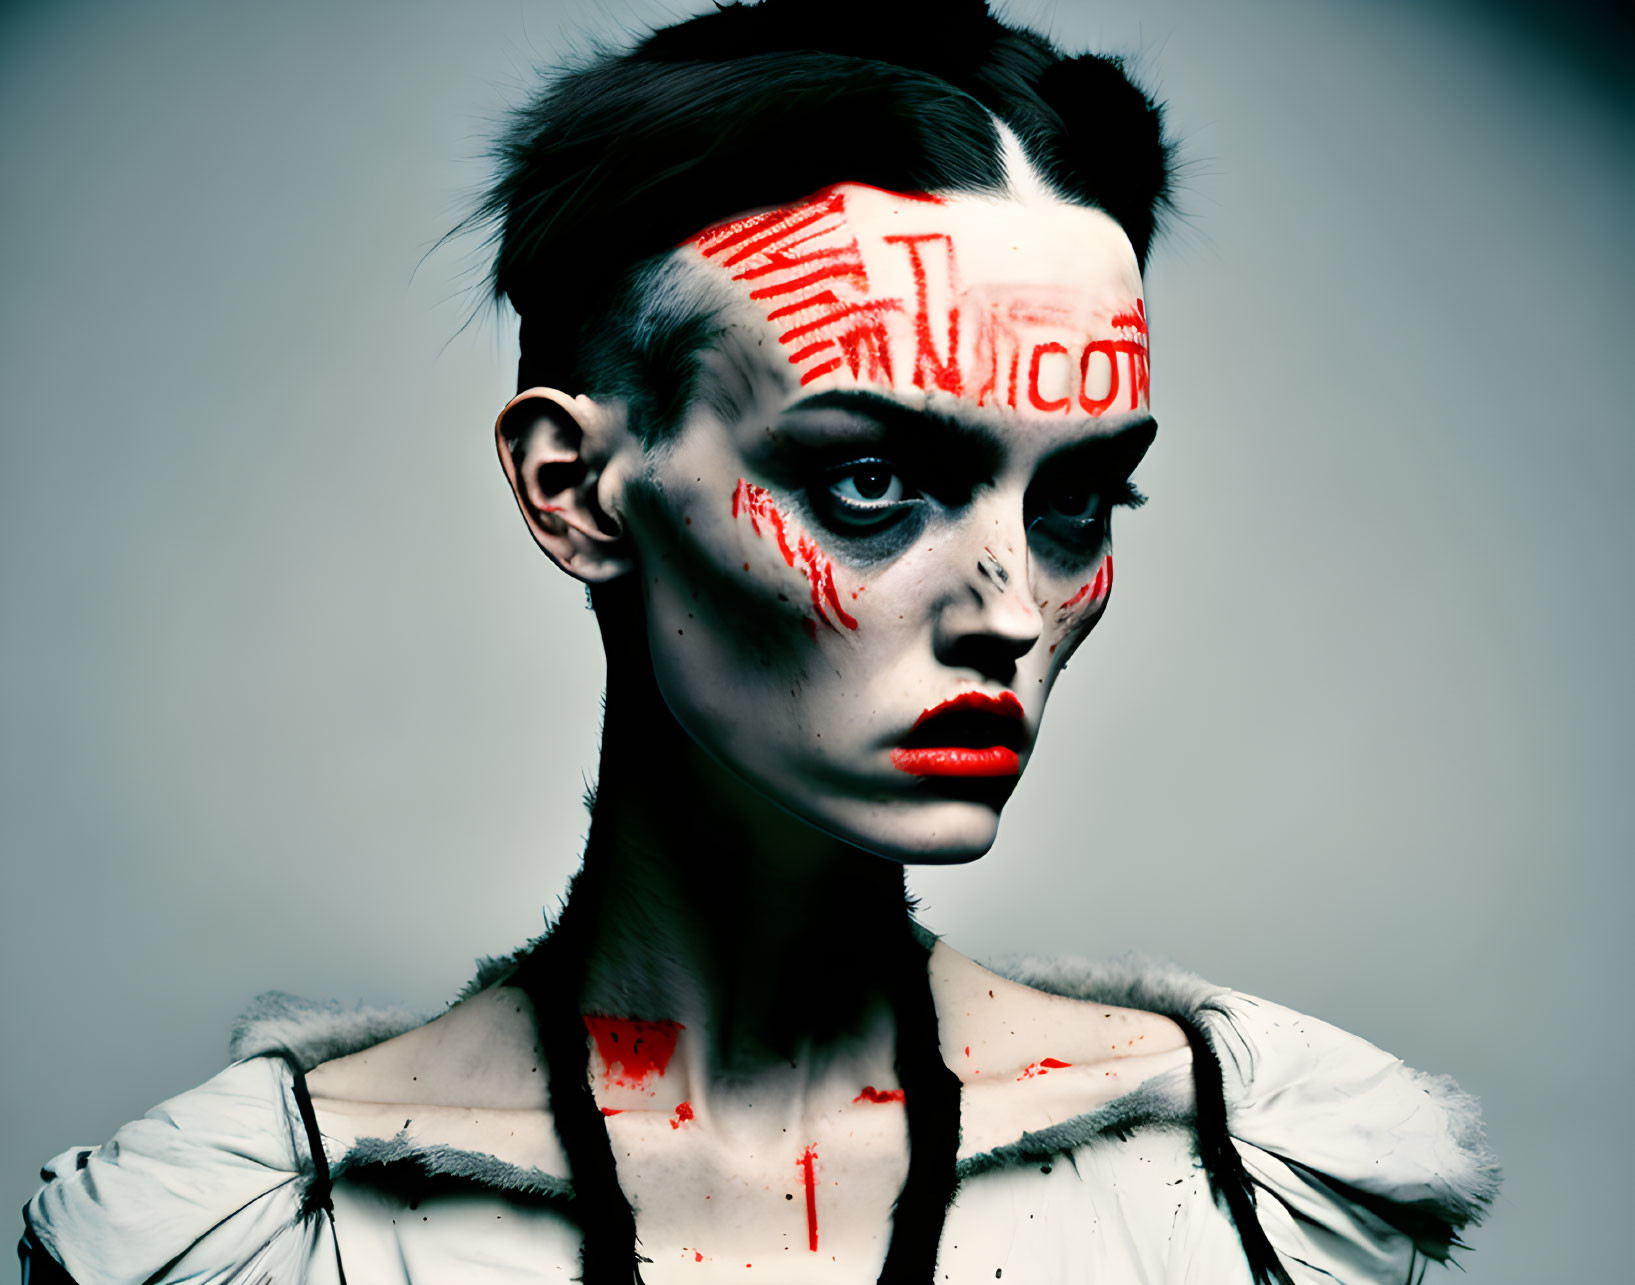 Intense makeup with vivid red streaks and designs on face